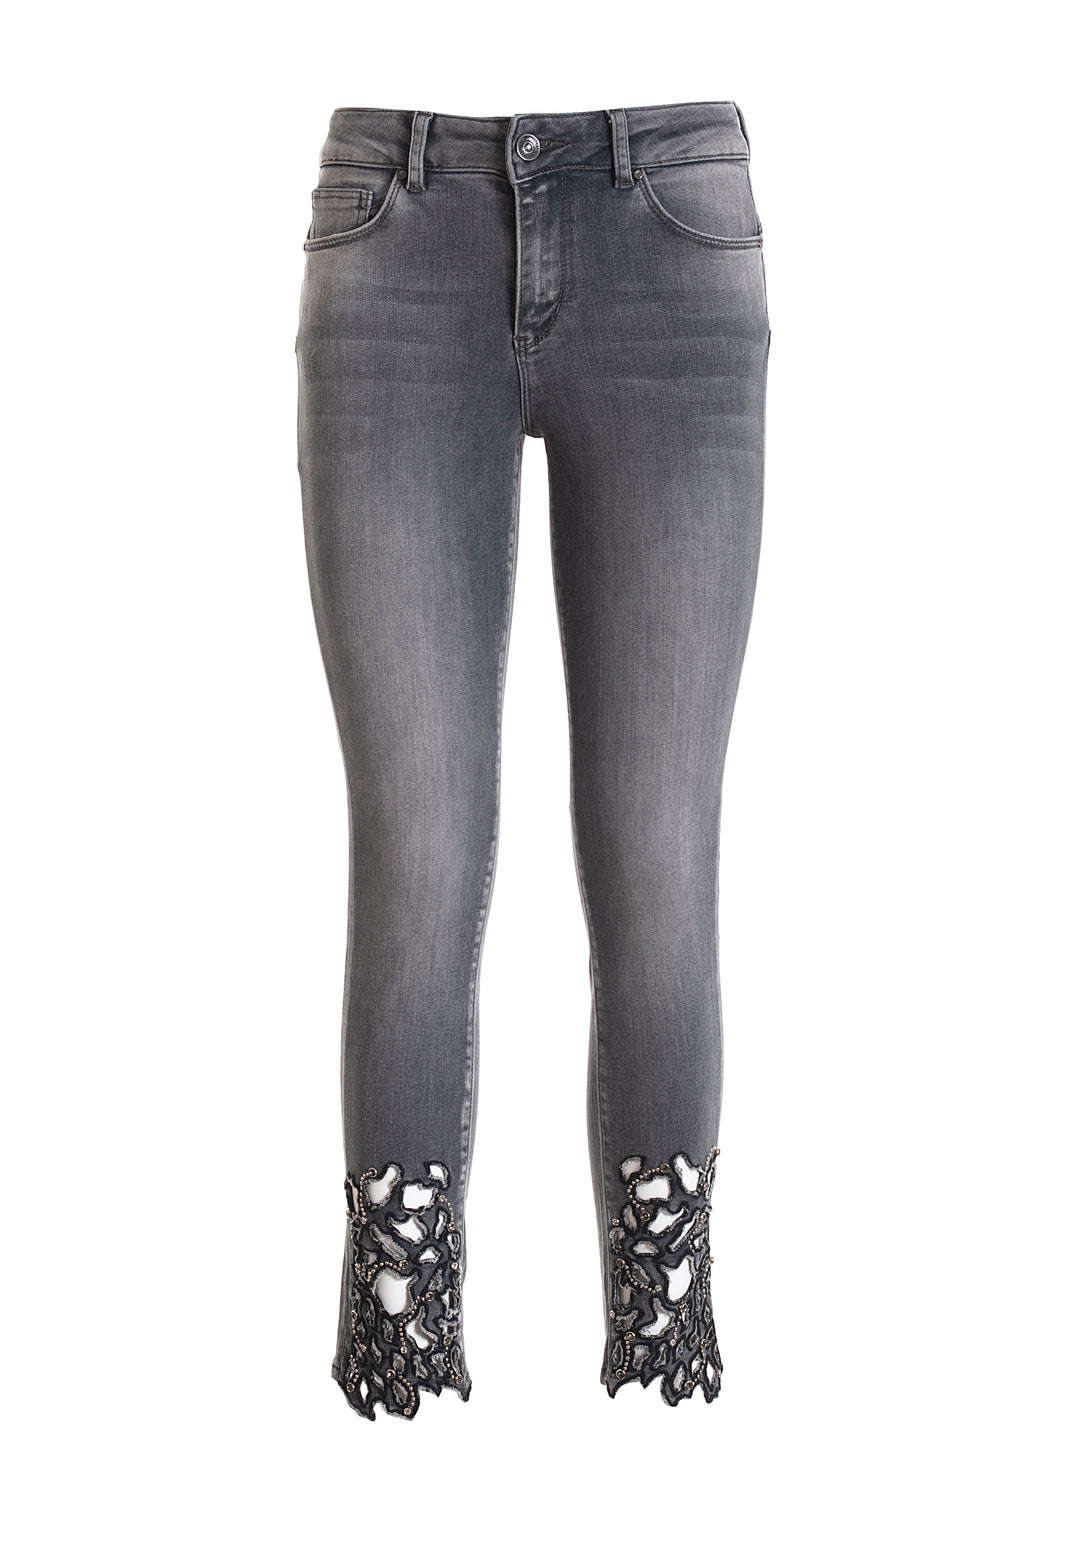 Jeans cropped skinny fit made in black denim with middle faded wash